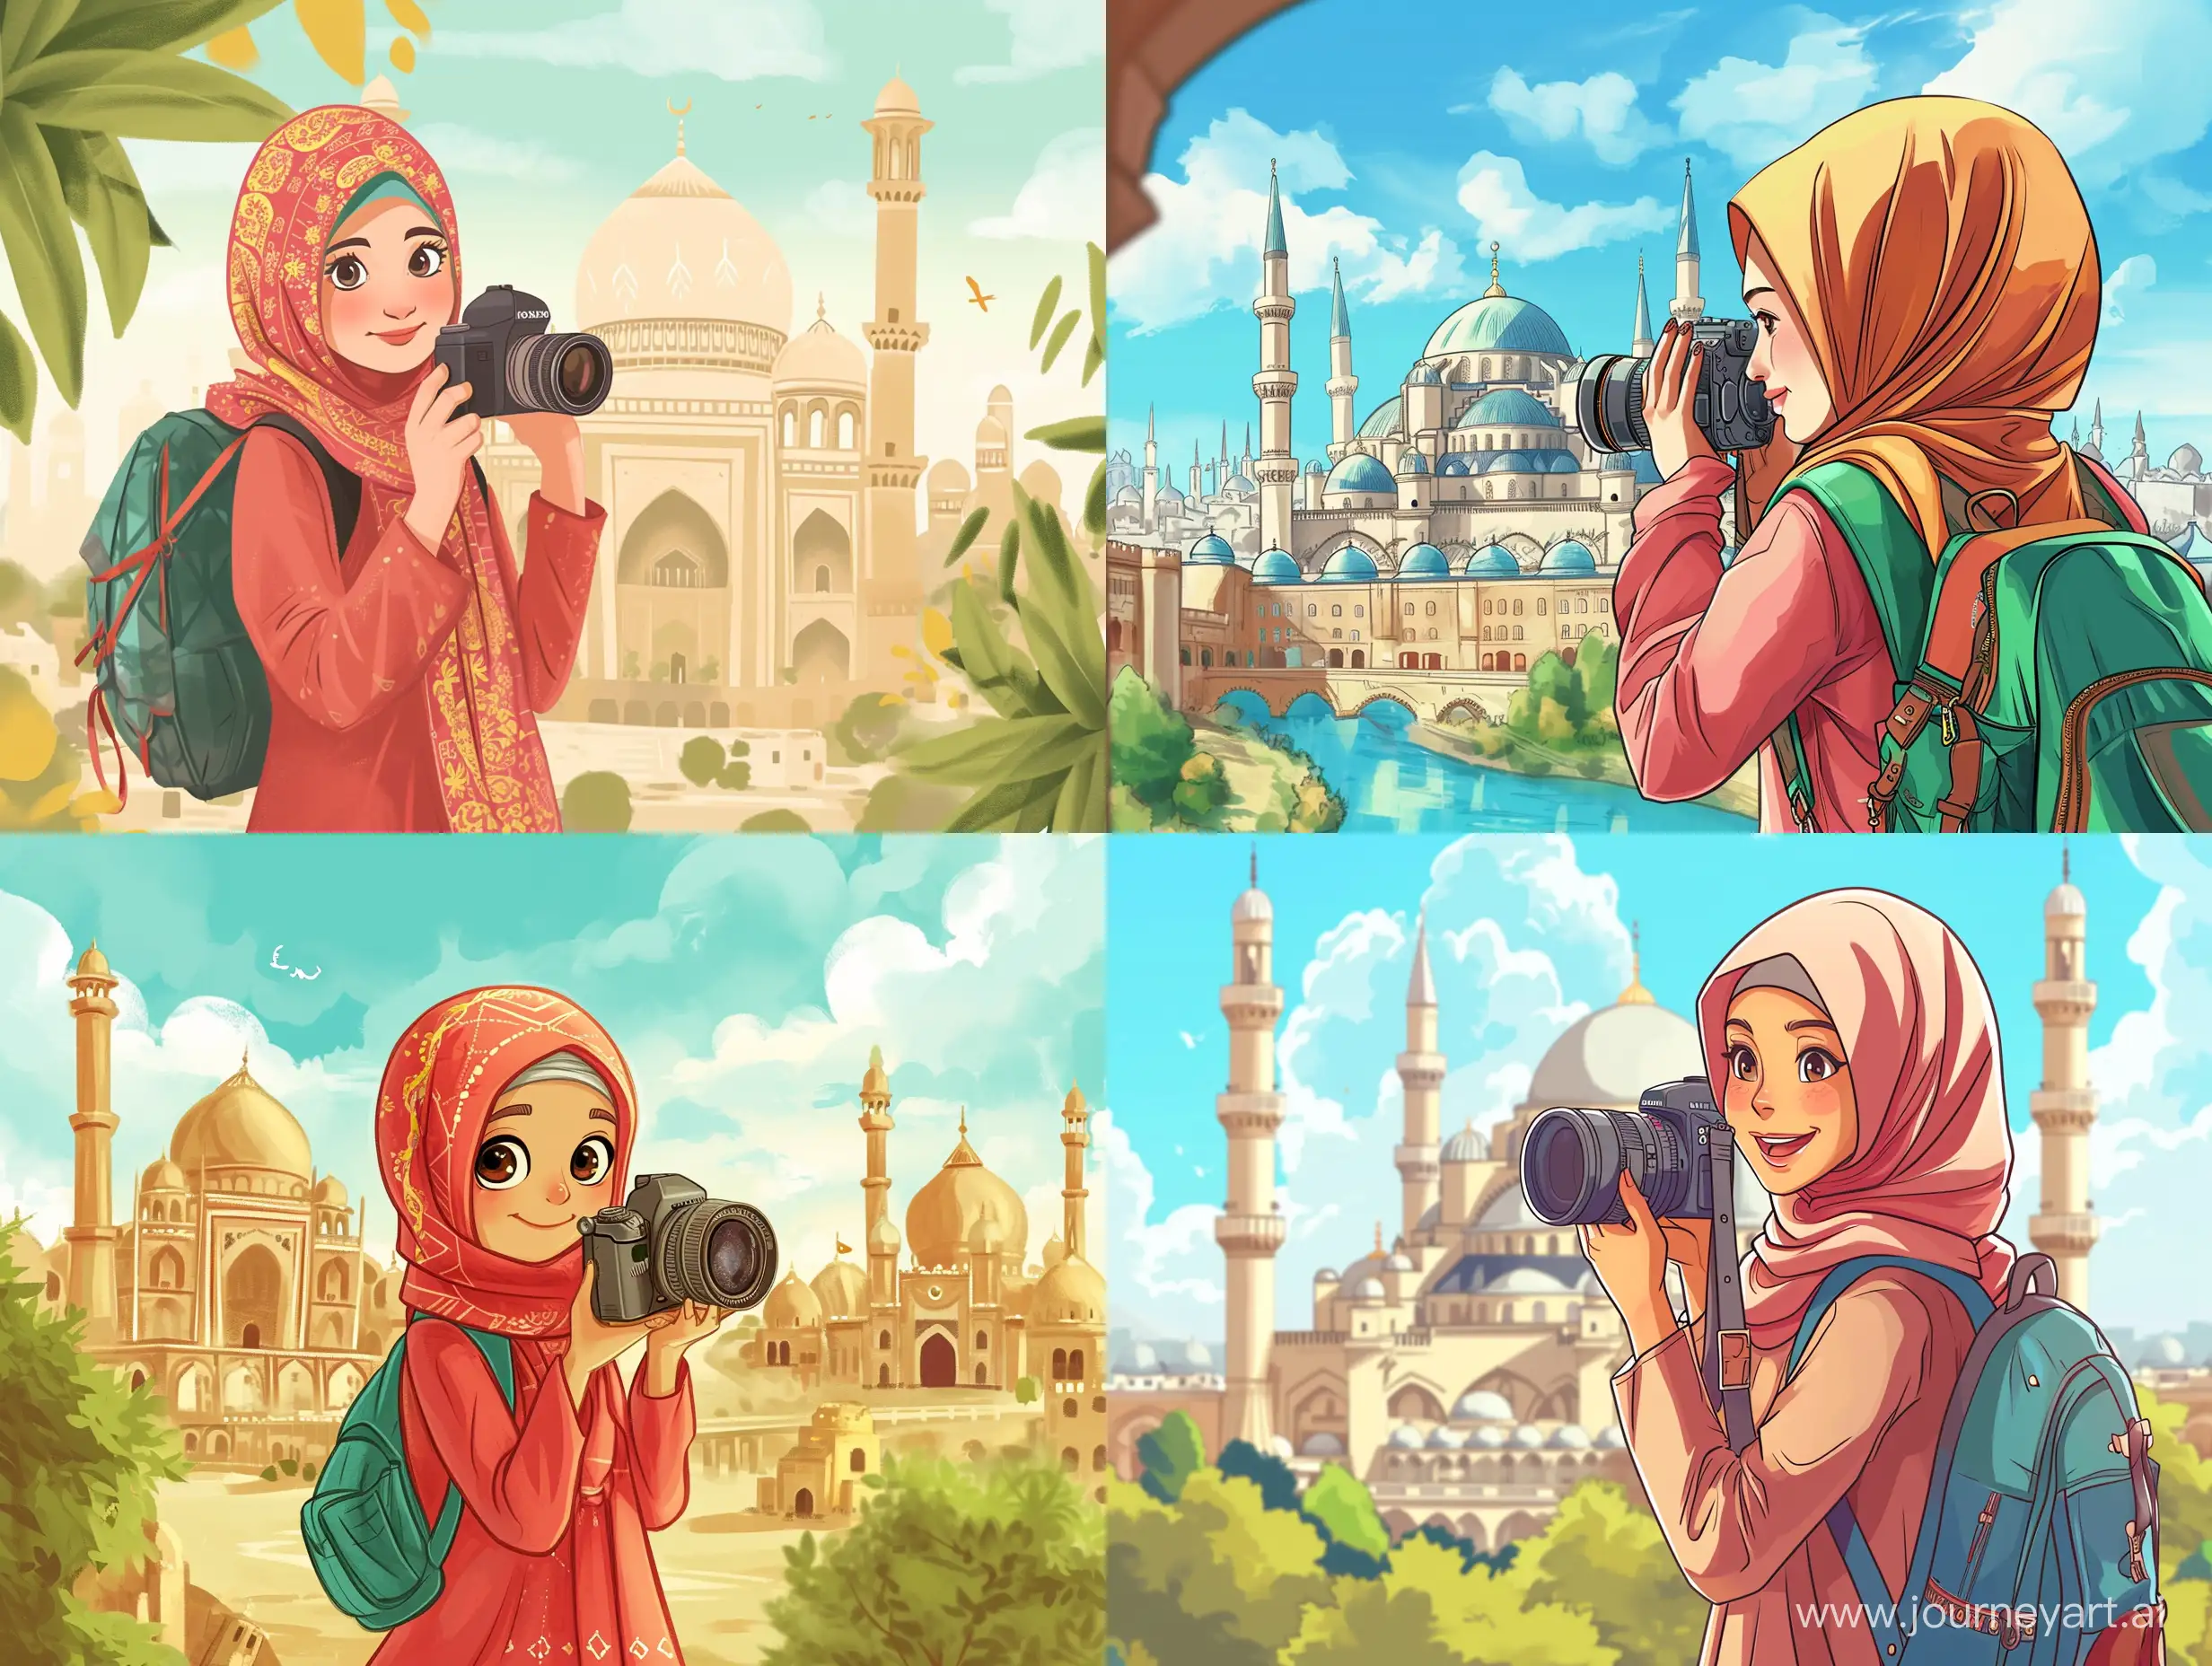 Once upon a time, there was a Muslim girl tourist  who loved to travel abroad. She had been planning her dream vacation for months and finally arrived at her desired destination. Excitedly, she explored the famous sites of the city, capturing beautiful pictures and immersing herself in the local culture. As she bid farewell to the city, Sarah knew that her love for travel and exploring new sites would continue to inspire her to embark on more exciting journeys in the future.